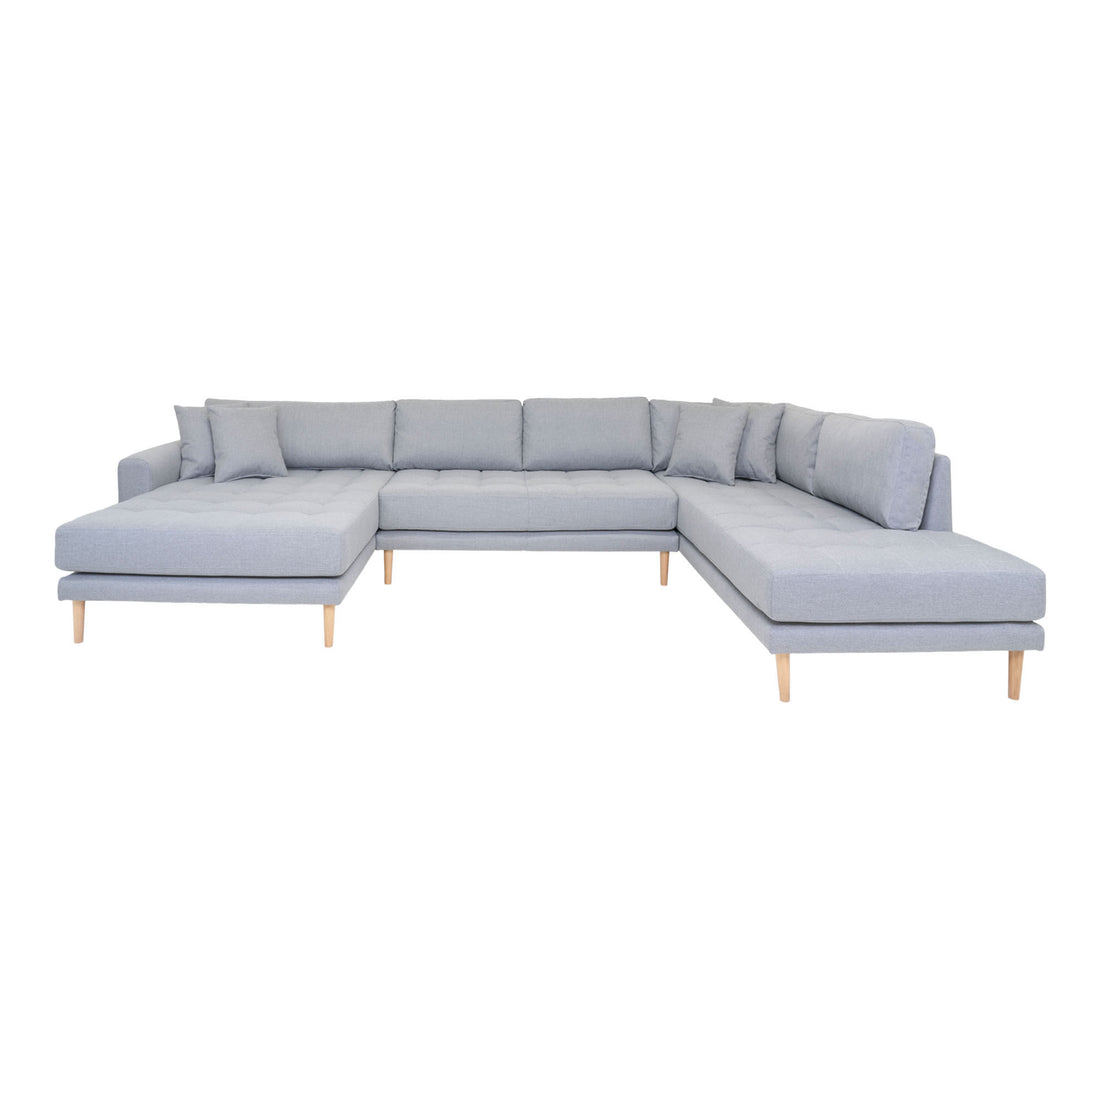 Lido U -sofa Open End - U -sofa Open end in fabric, left -wing in light gray with four pillows and nature wooden legs, HN1001 - 1 - pcs